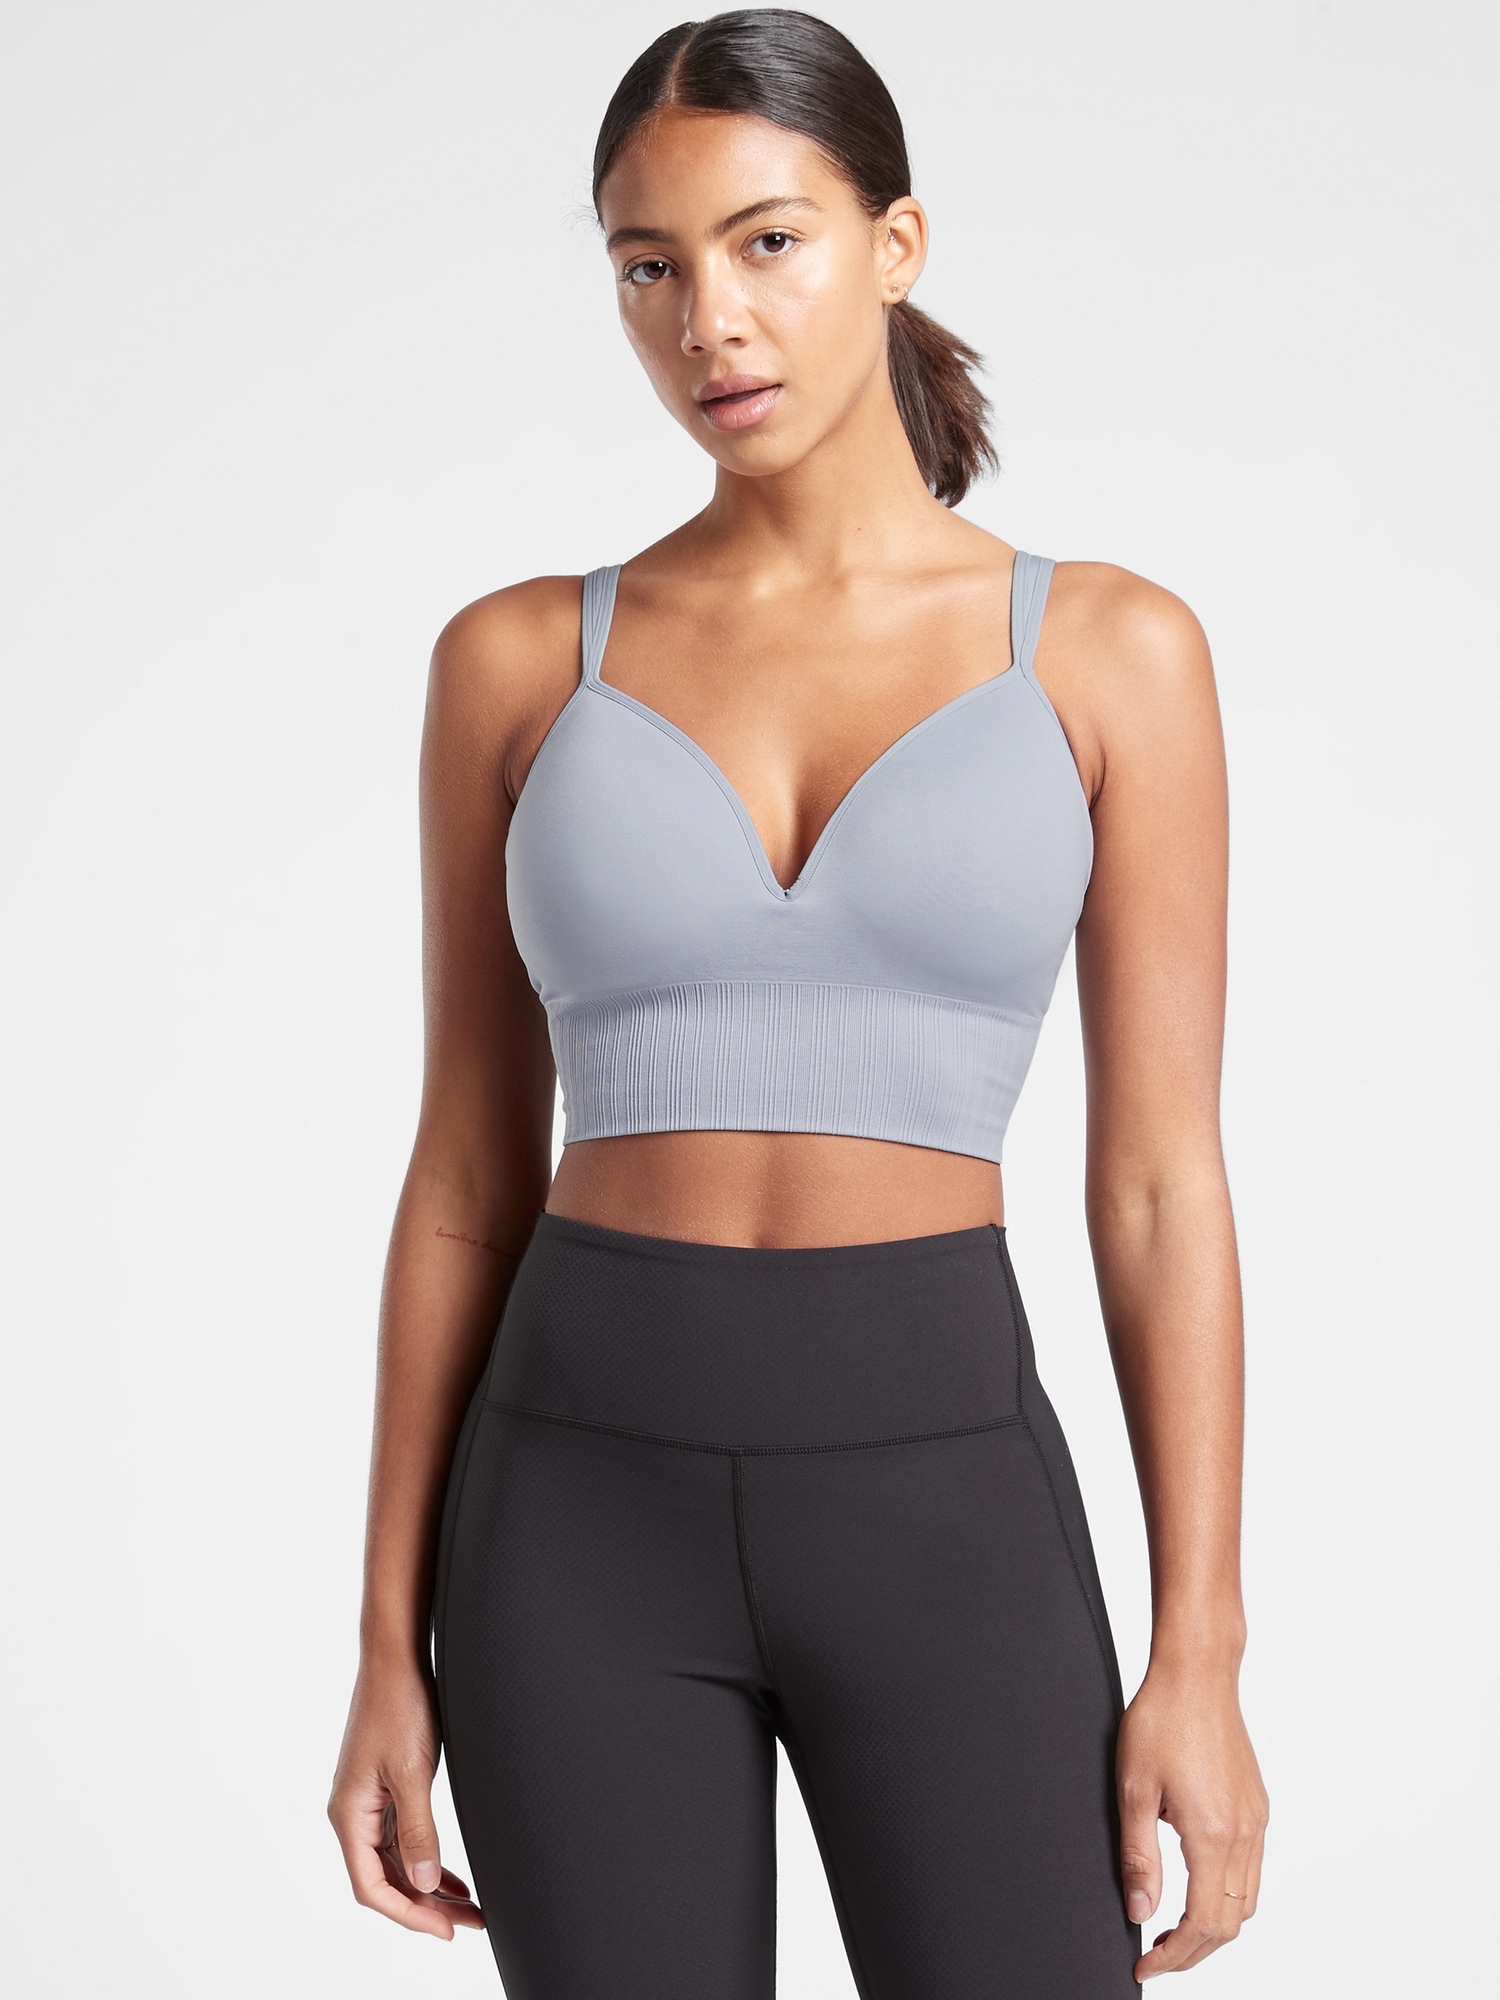 Athleta Created Two New Sports Bras for Breast Cancer Awareness Month — and  One Is Made Specially for Survivors